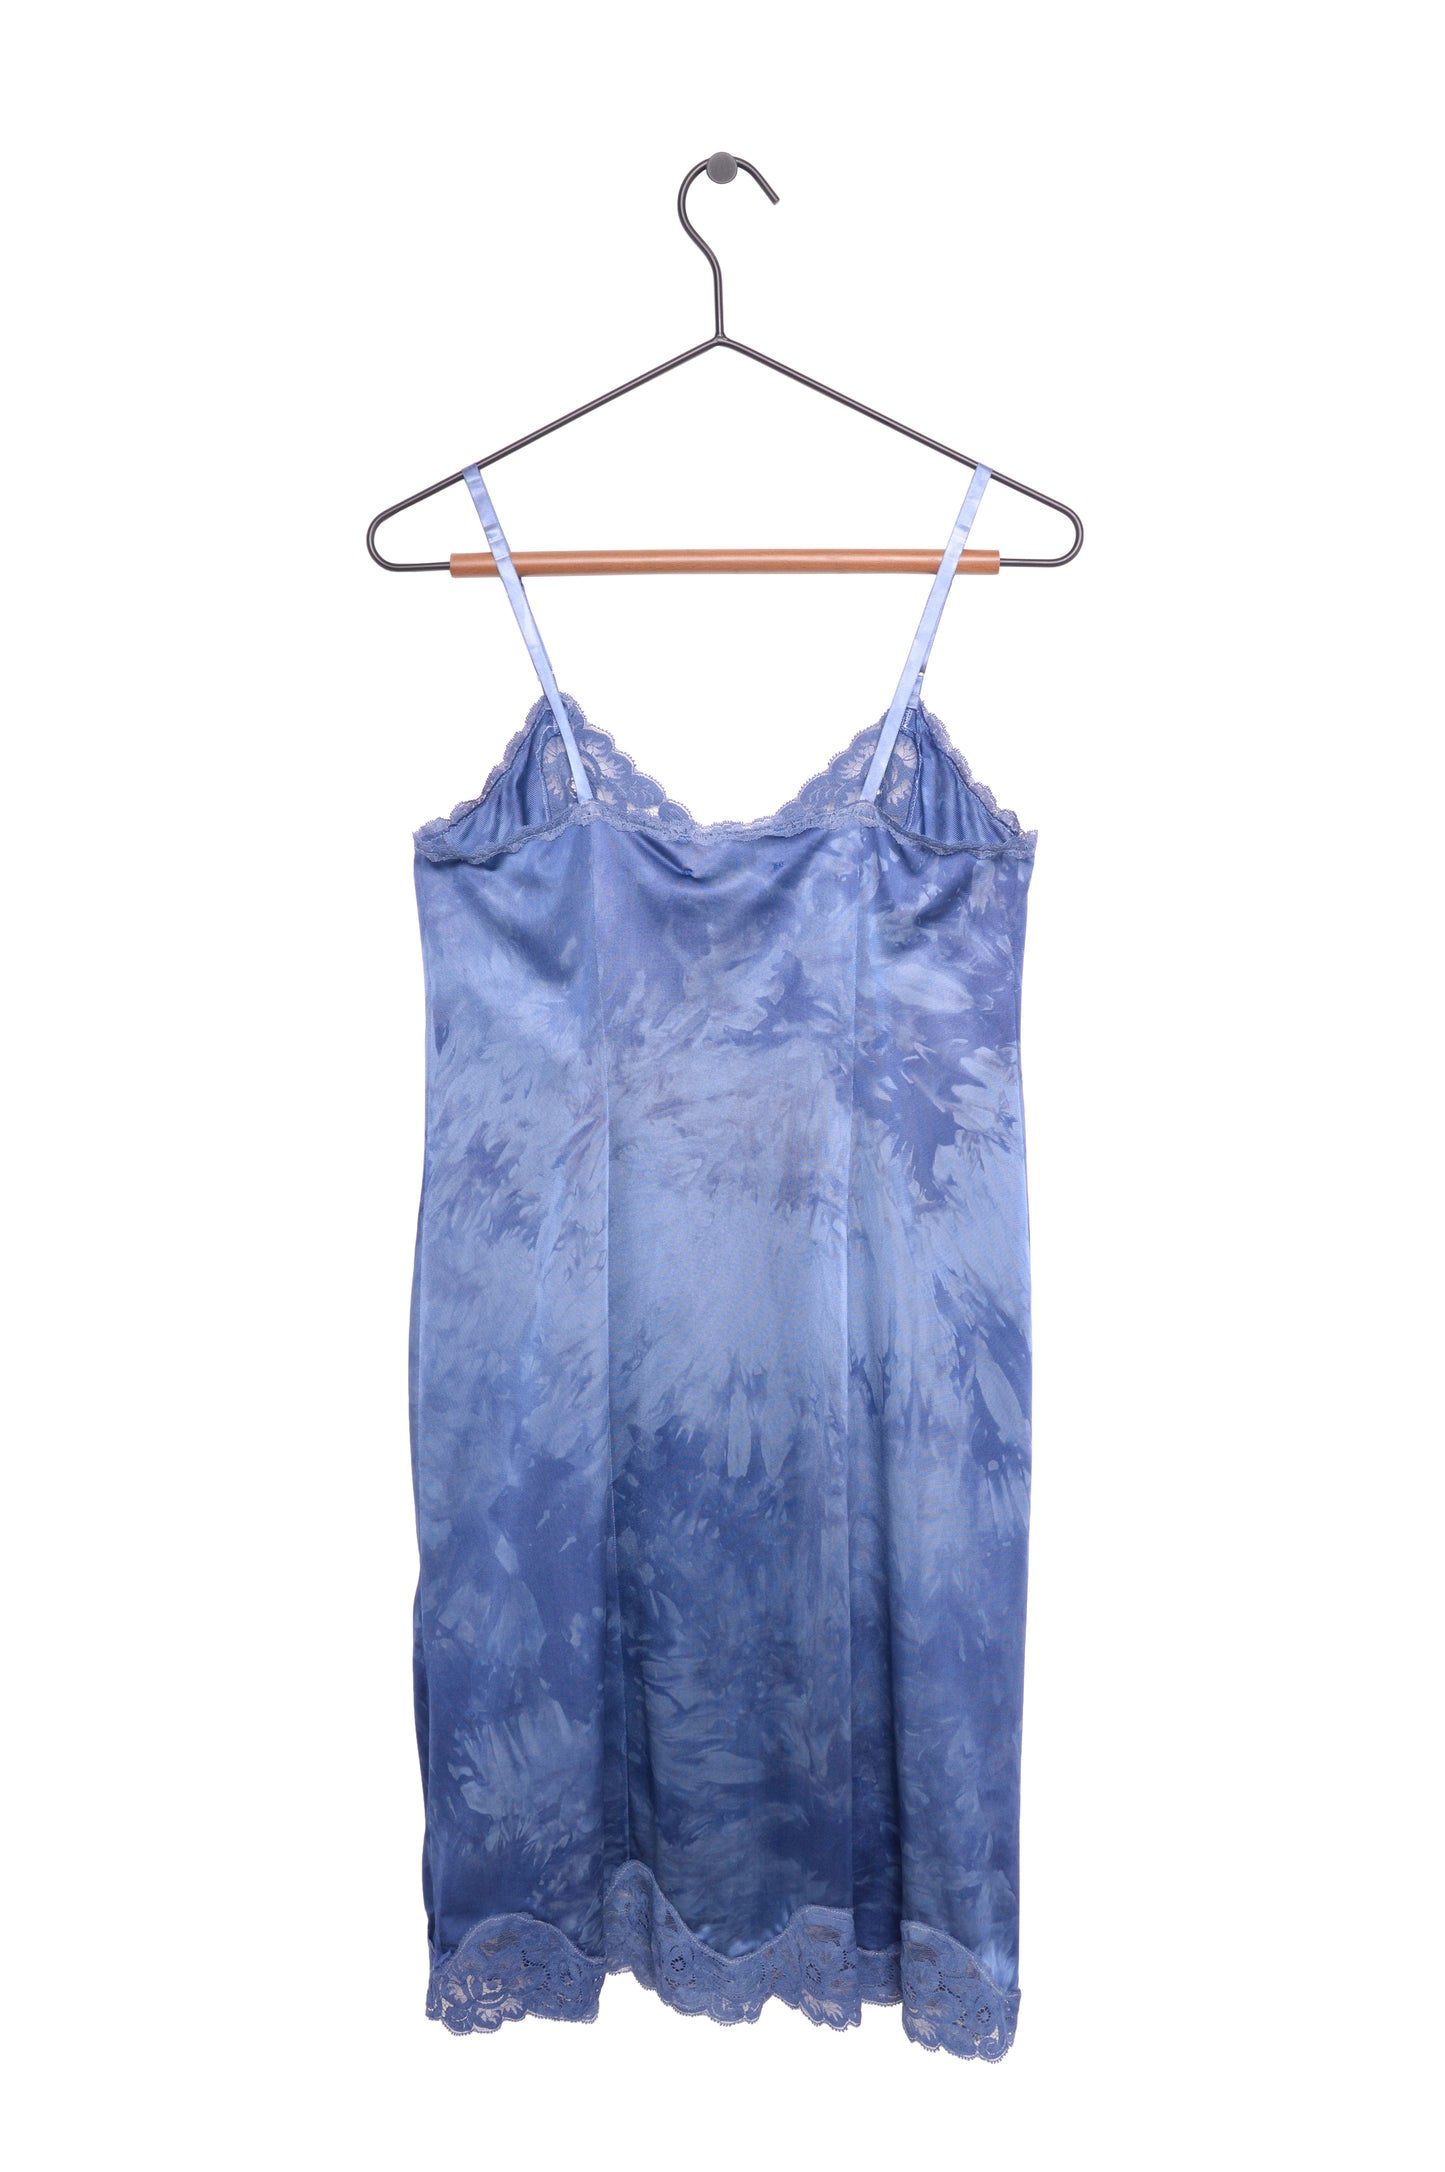 1950s Hand-Dyed Lace Slip Dress